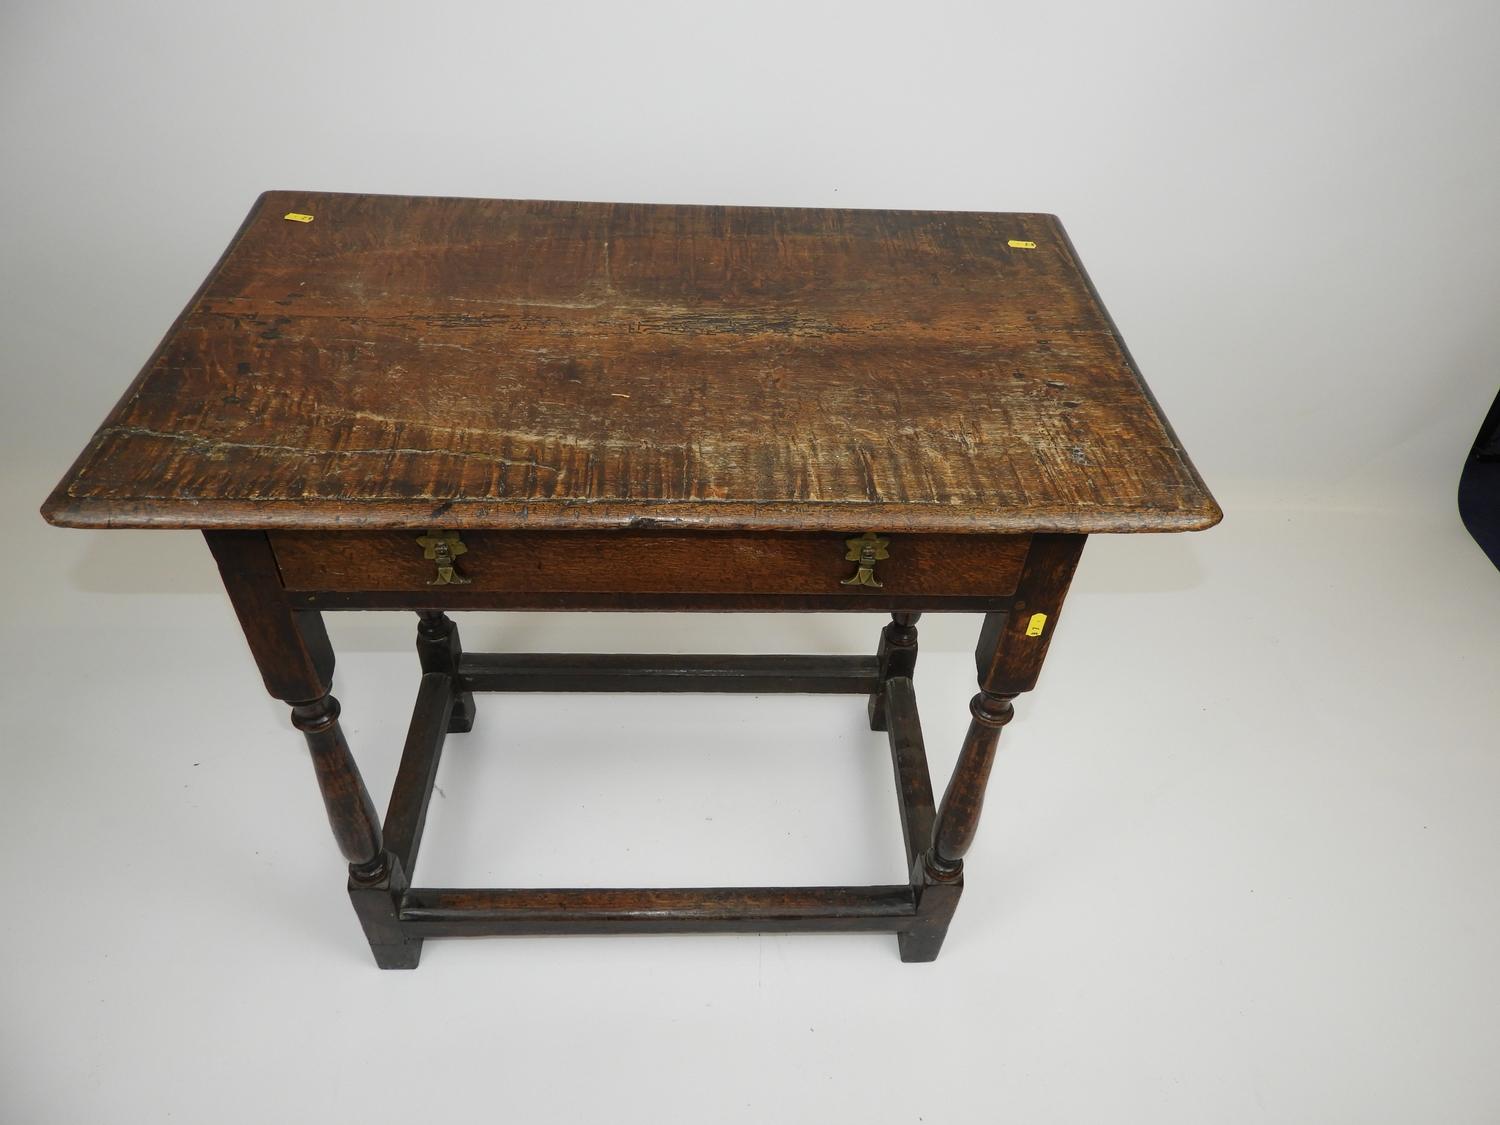 19th Century Oak Side Table with Single Drawer - 31x 19x 29" high - Image 2 of 3